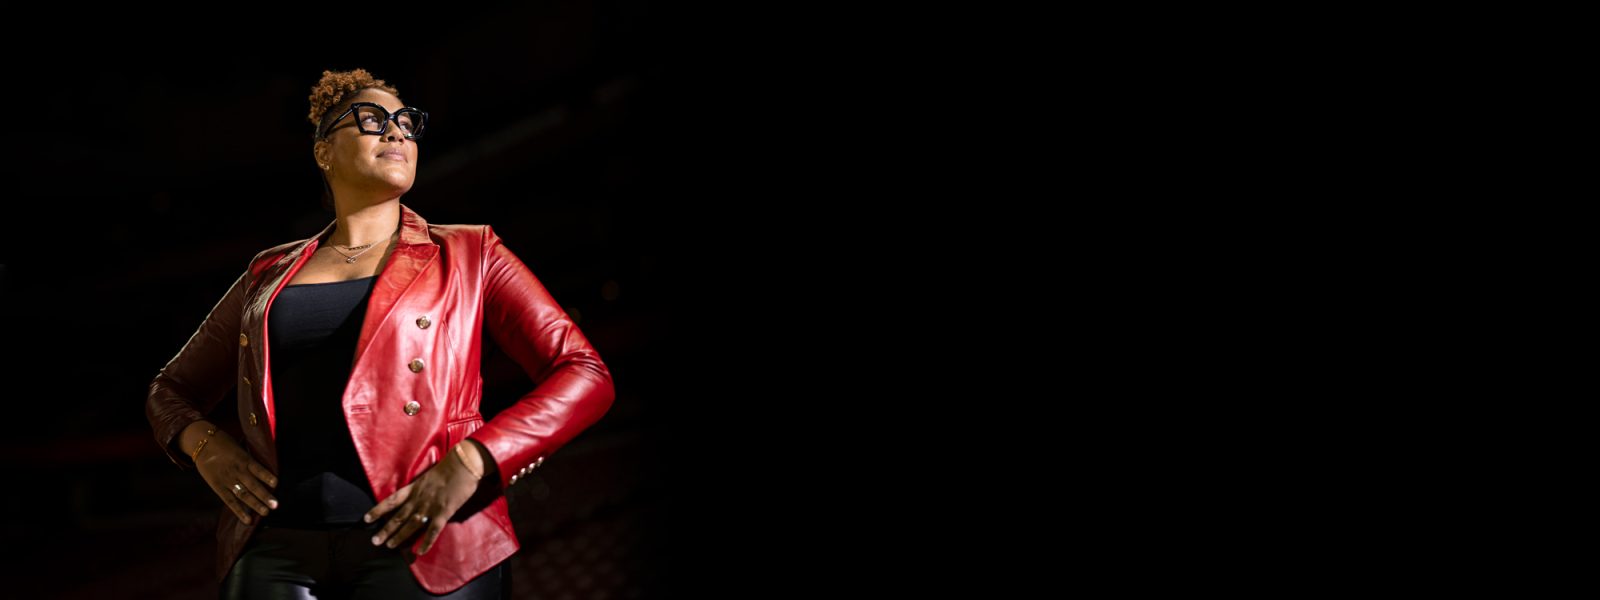 Marisa Mosely wearing a red leather jacket